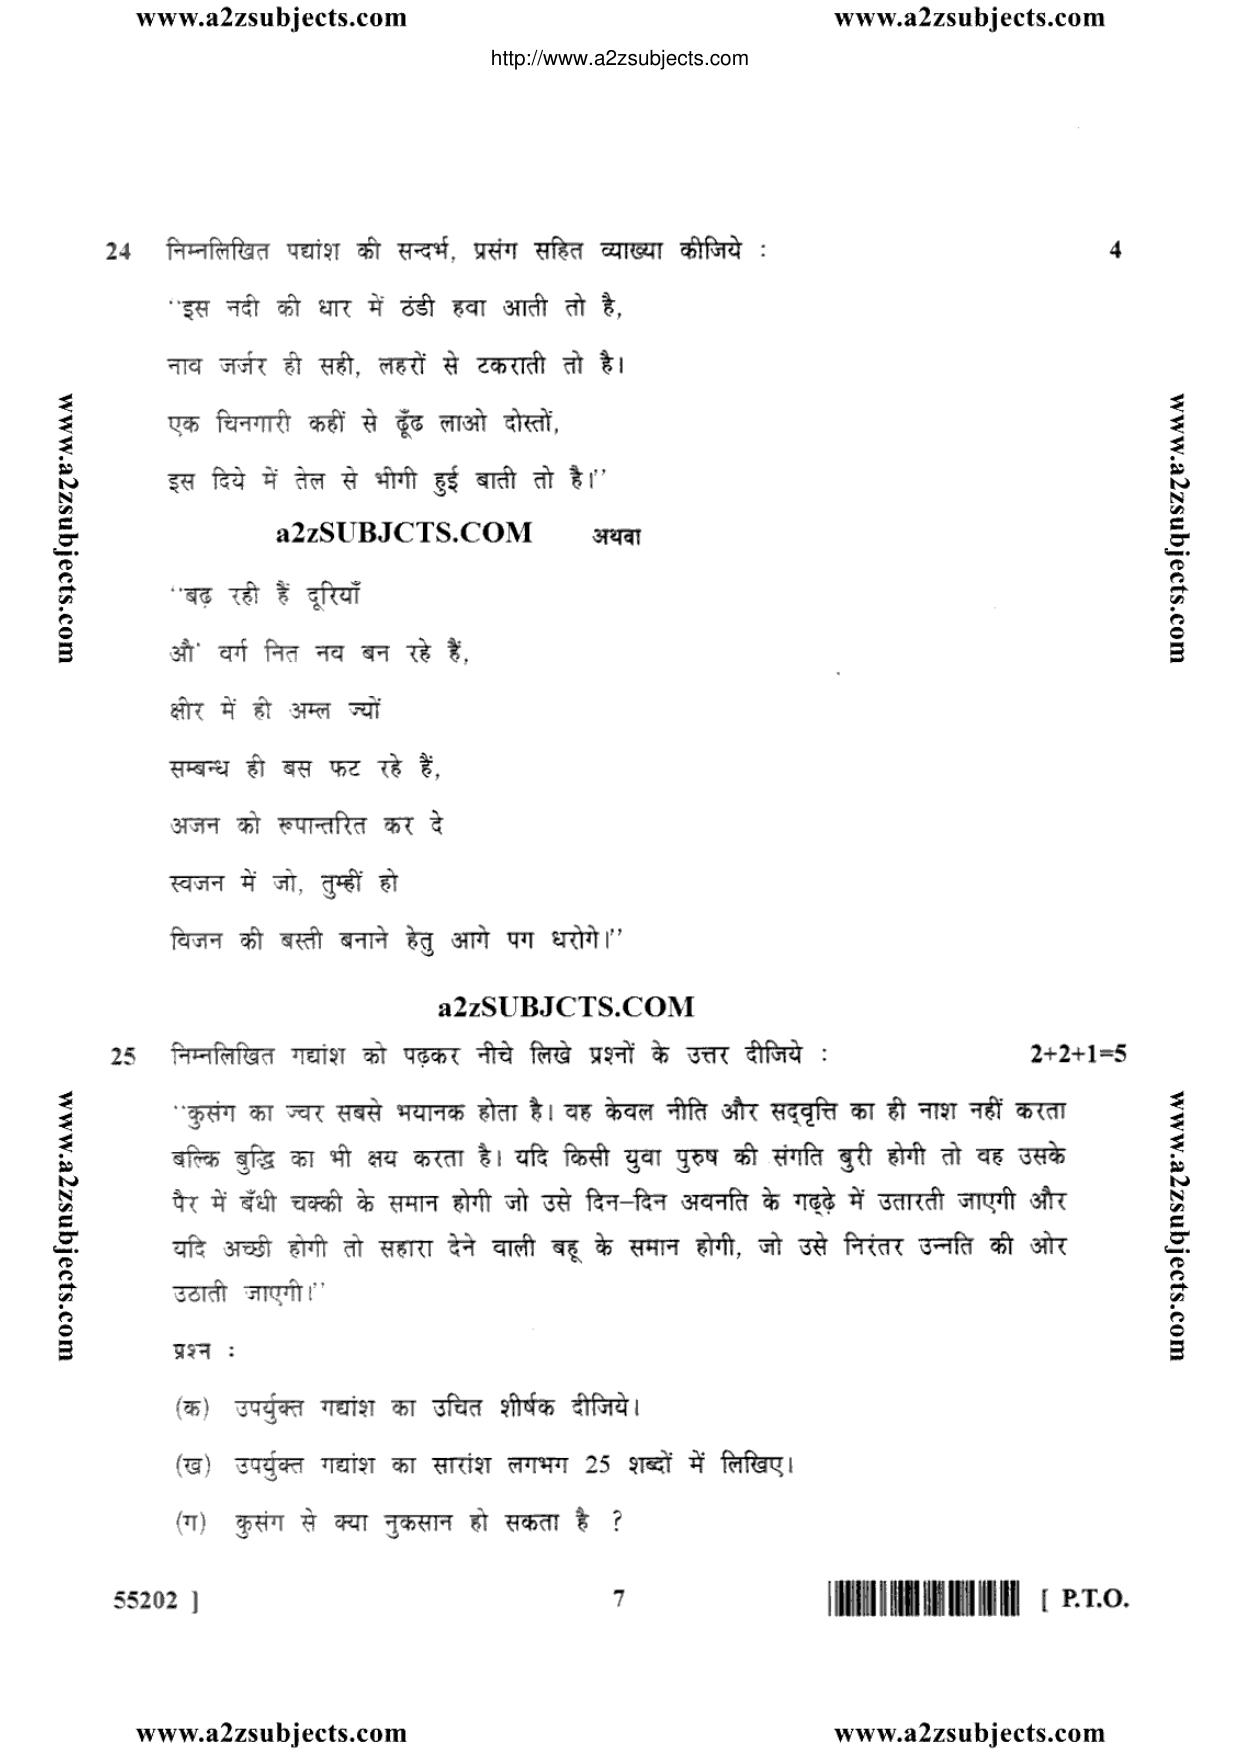 MP Board Class 10 Marathi 2017 Question Paper - Page 7